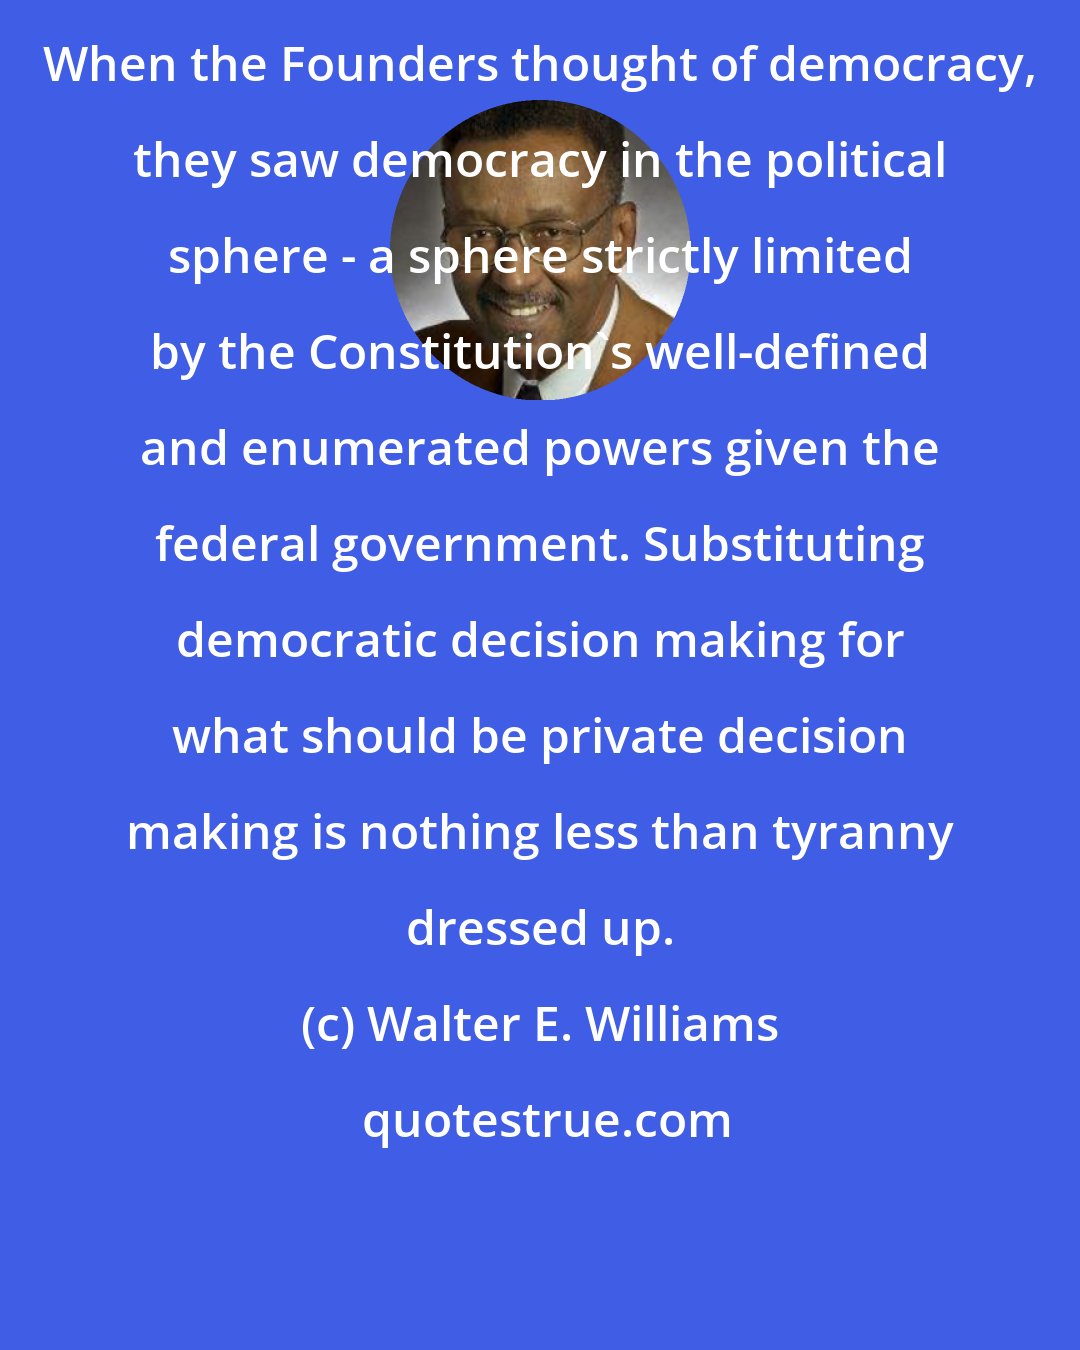 Walter E. Williams: When the Founders thought of democracy, they saw democracy in the political sphere - a sphere strictly limited by the Constitution's well-defined and enumerated powers given the federal government. Substituting democratic decision making for what should be private decision making is nothing less than tyranny dressed up.